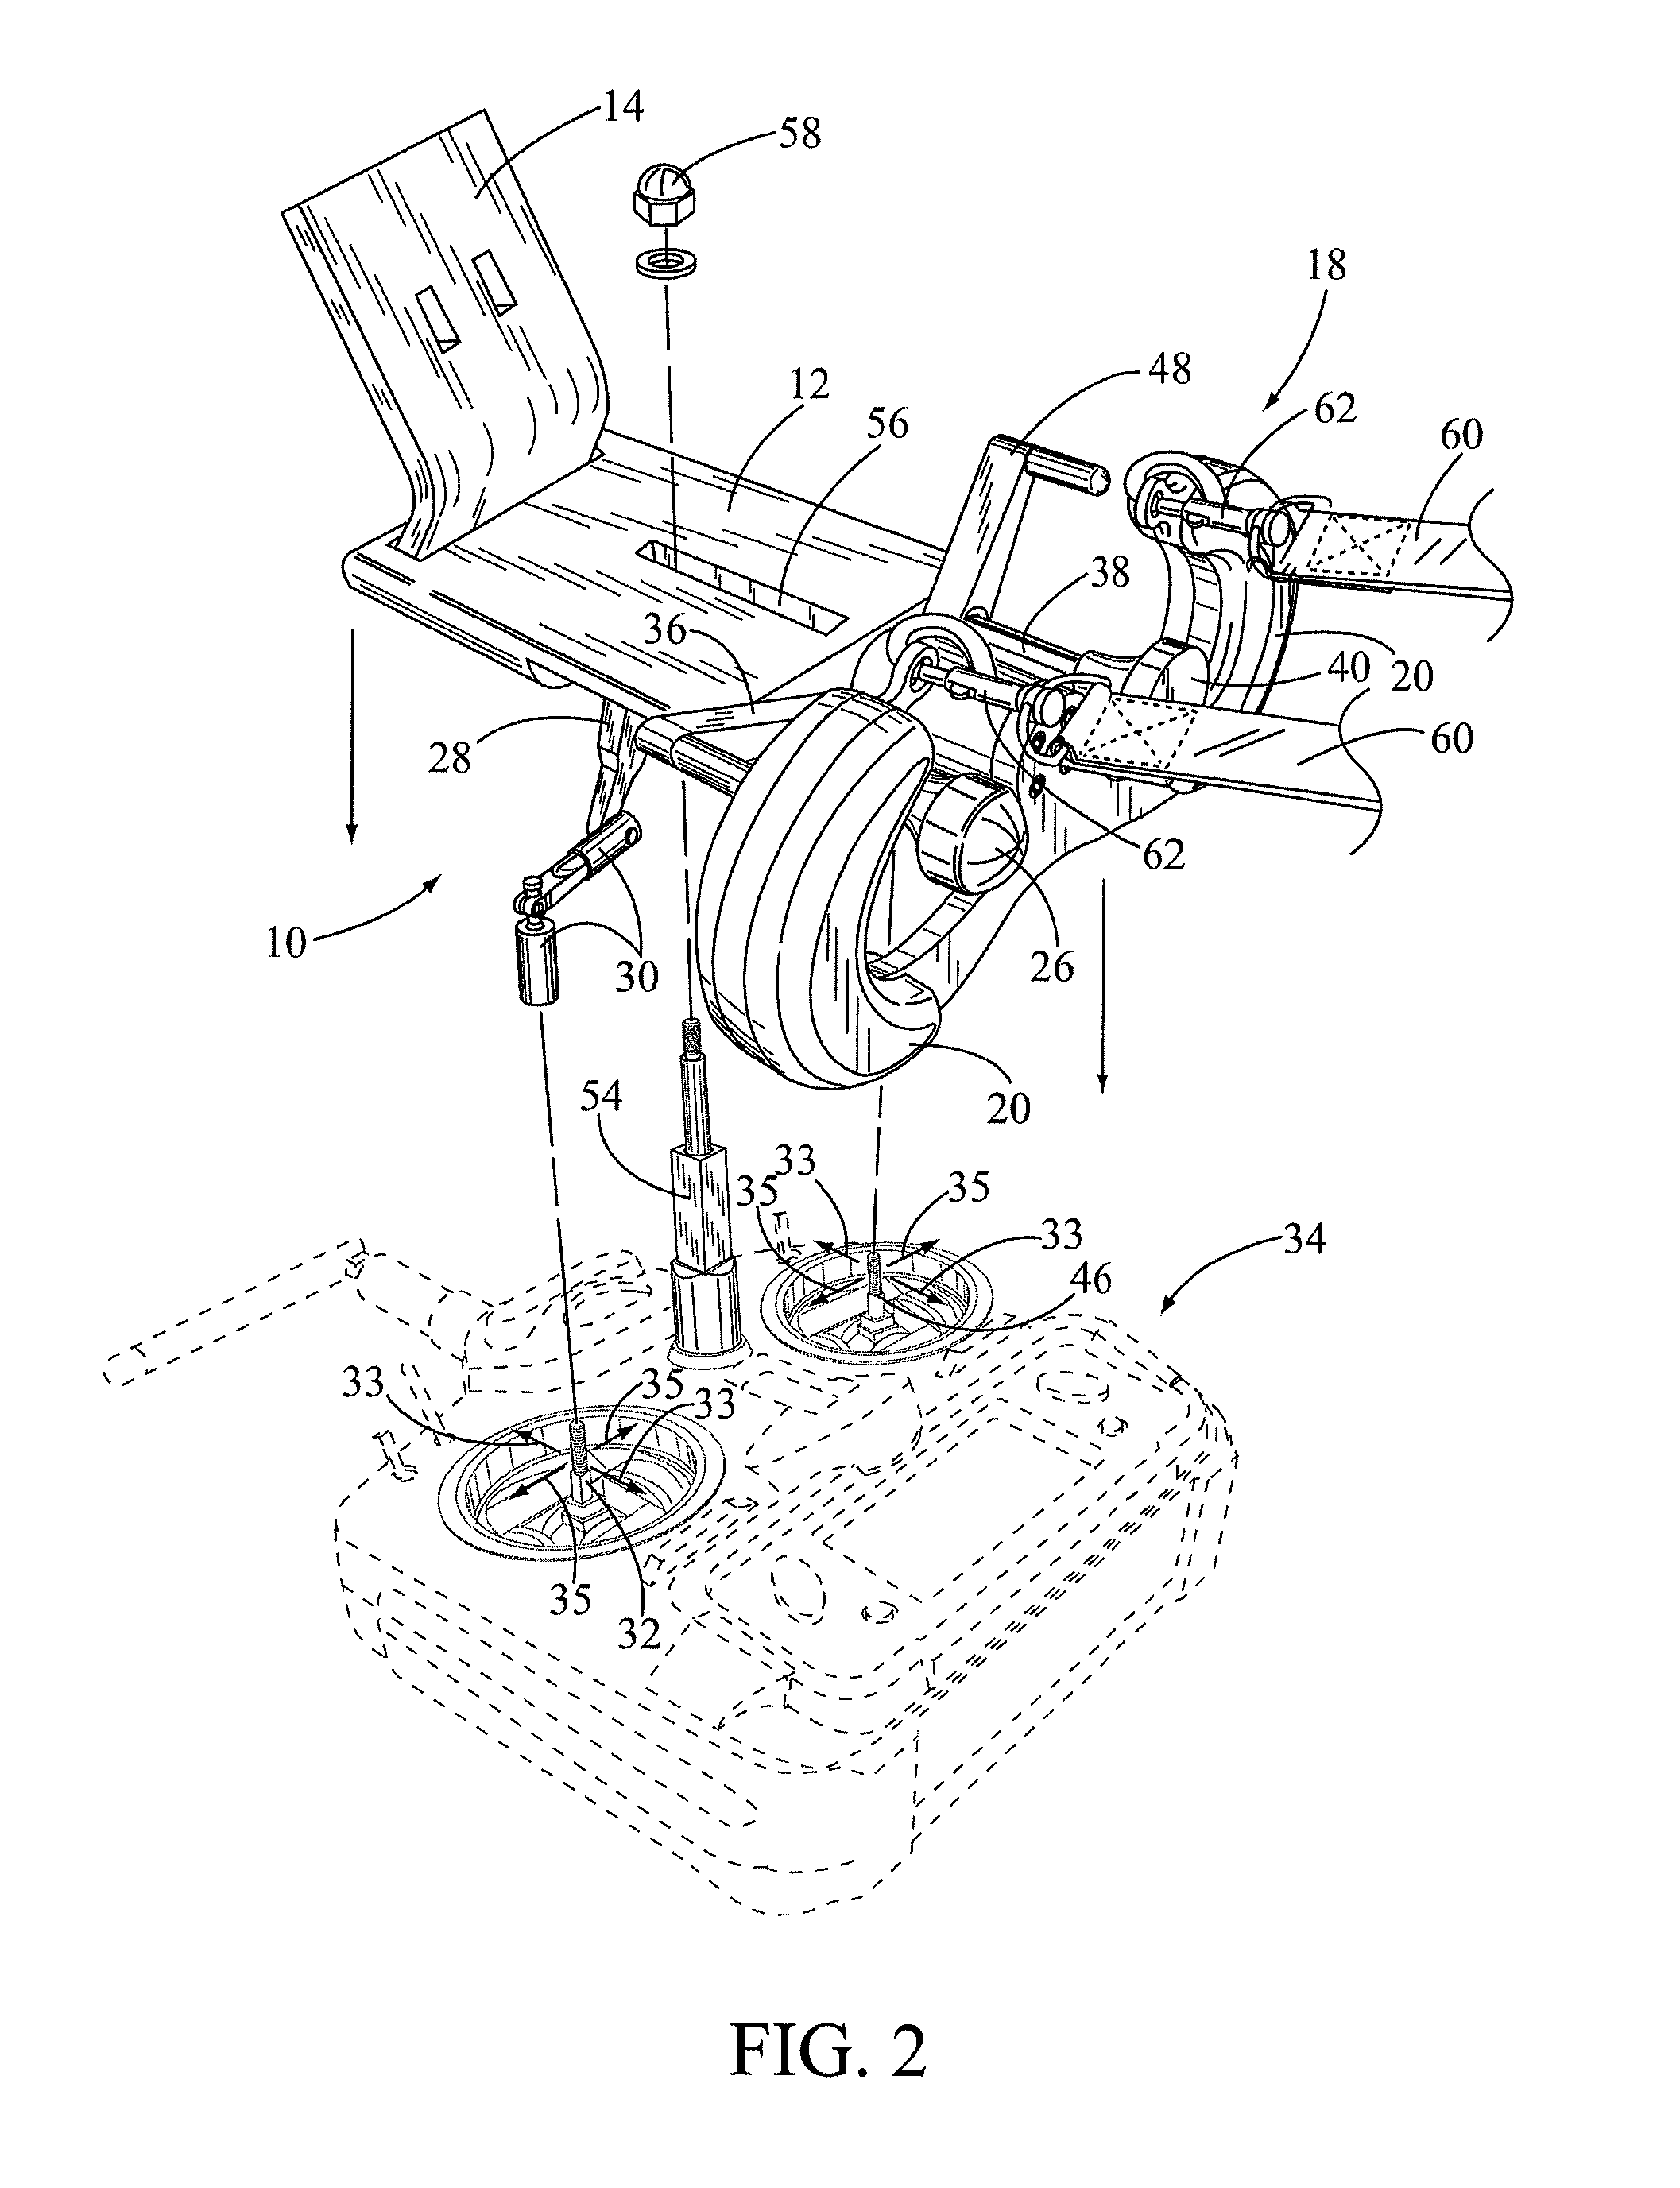 Portable cockpit yoke assembly for mounting on a radio controlled transmitter used with a model airplane